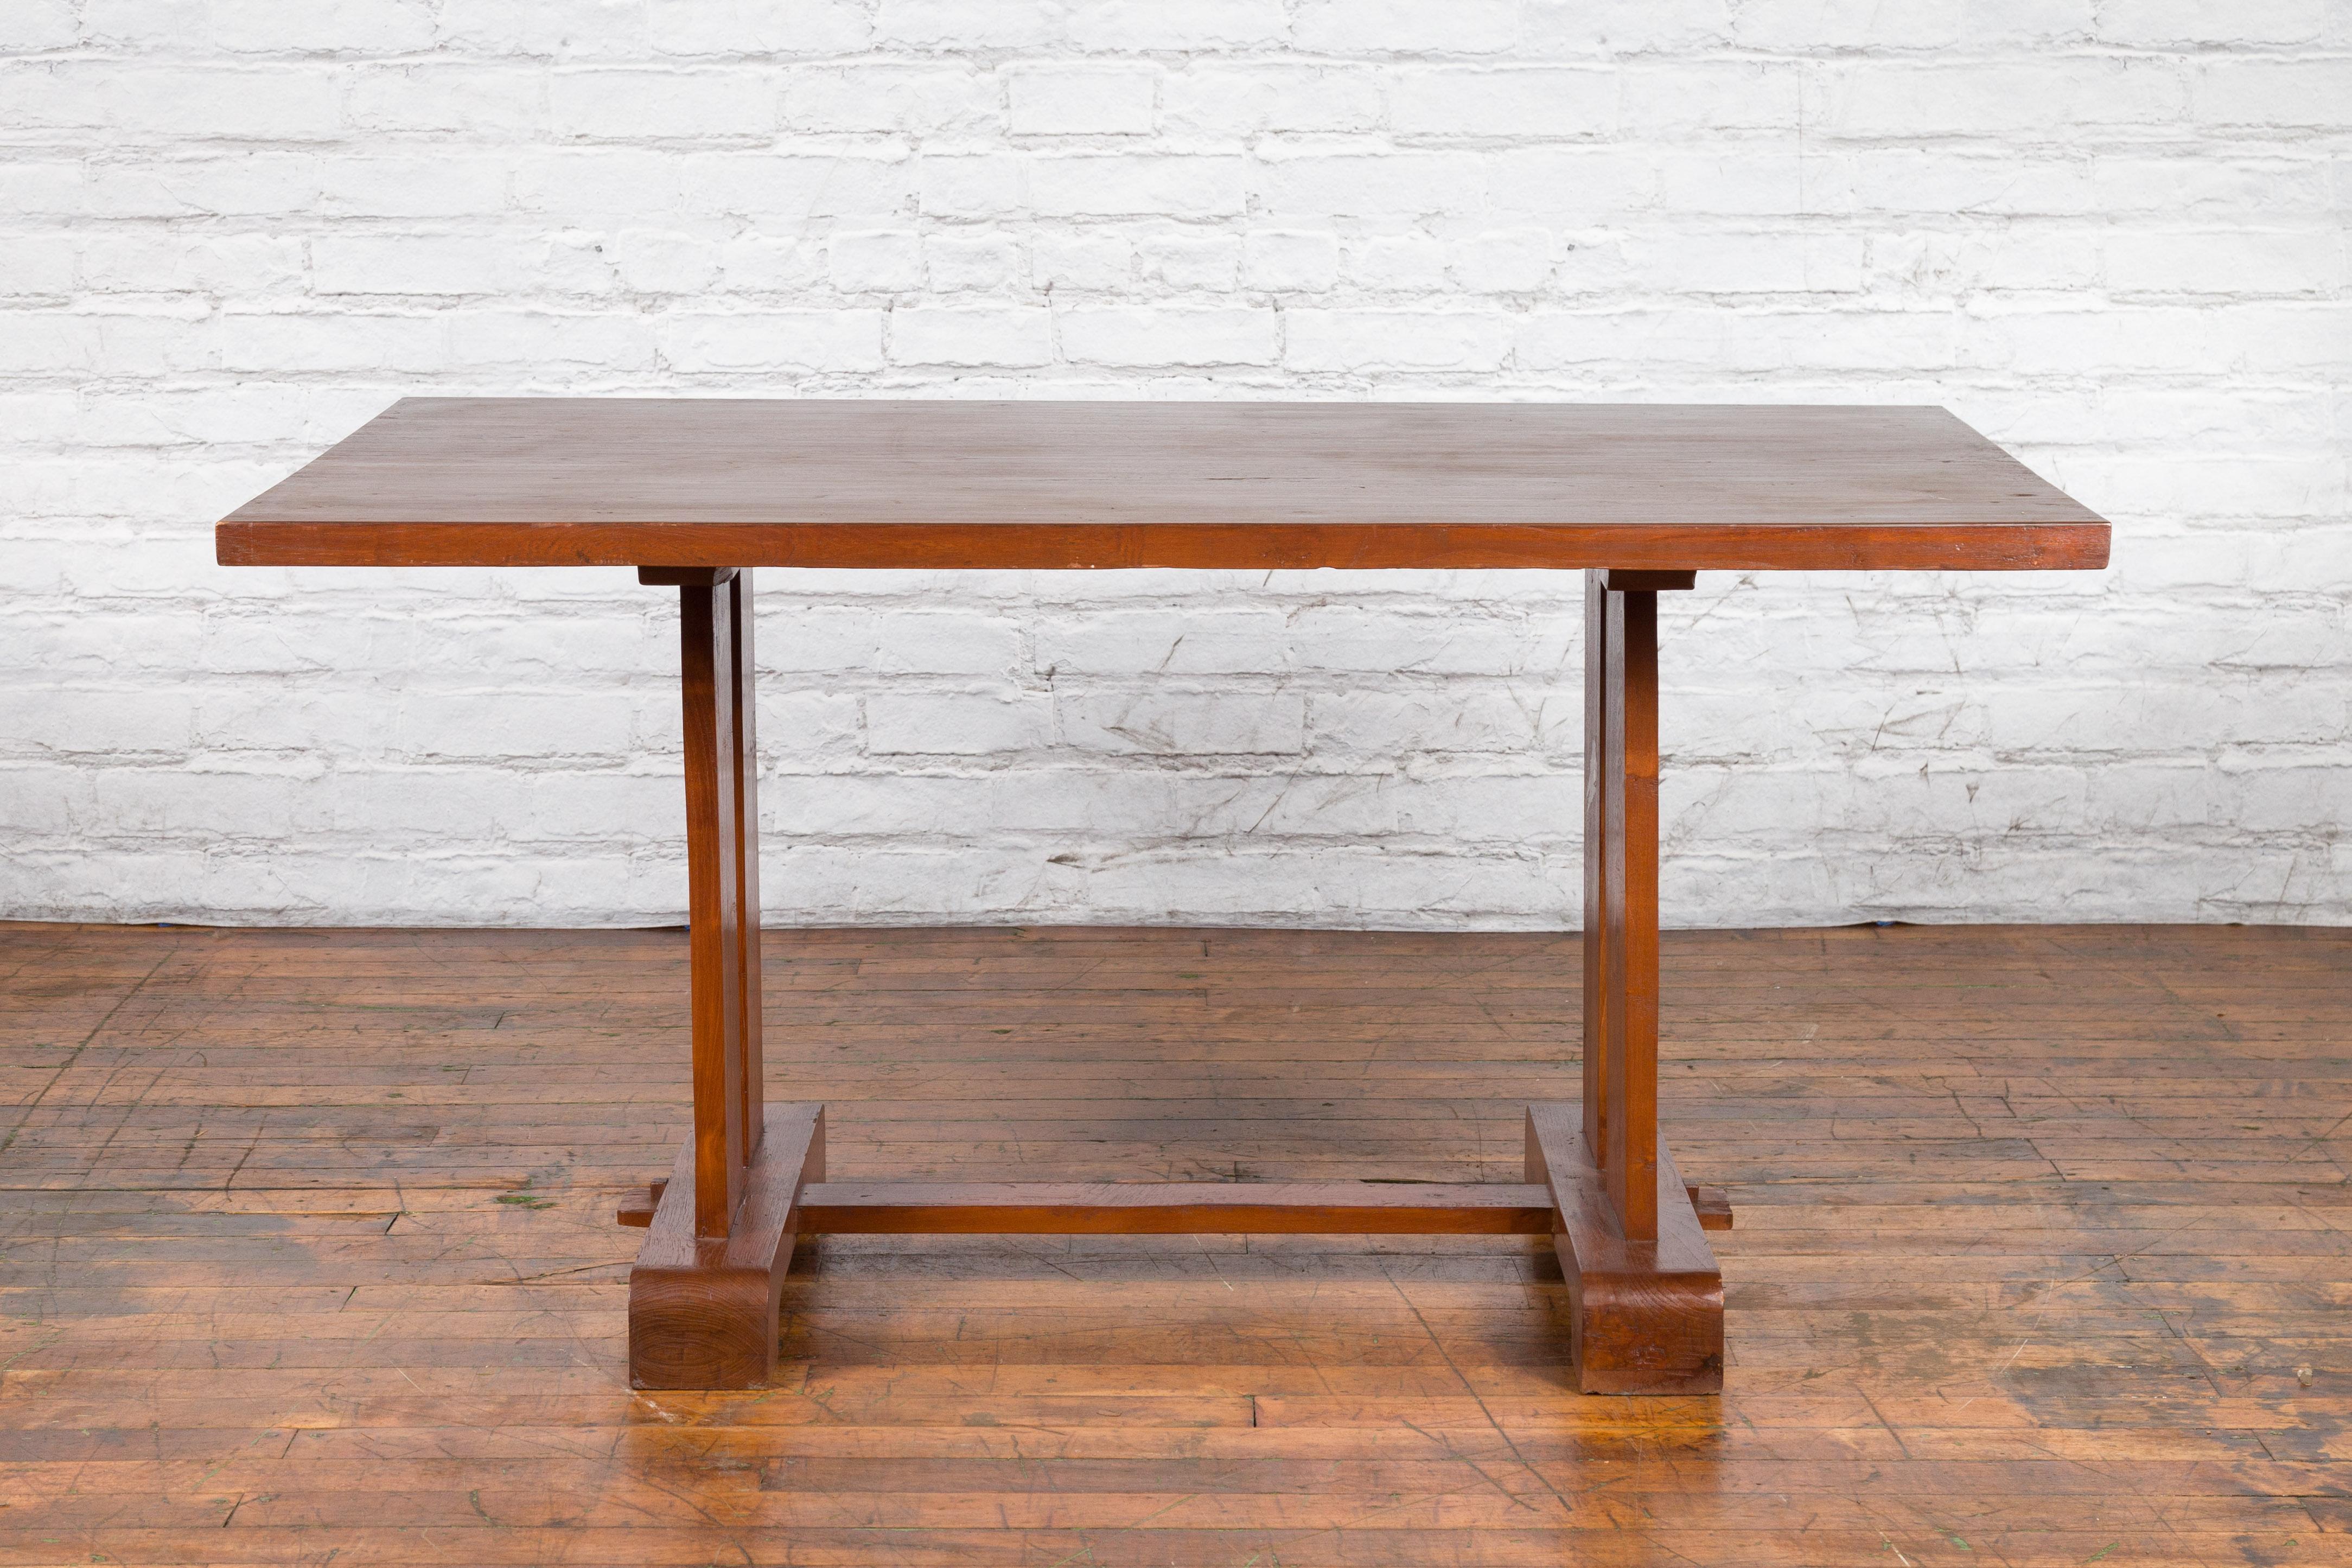 Antique Indonesian Teakwood Dining Table with Trestle Base and Brown Patina In Good Condition For Sale In Yonkers, NY